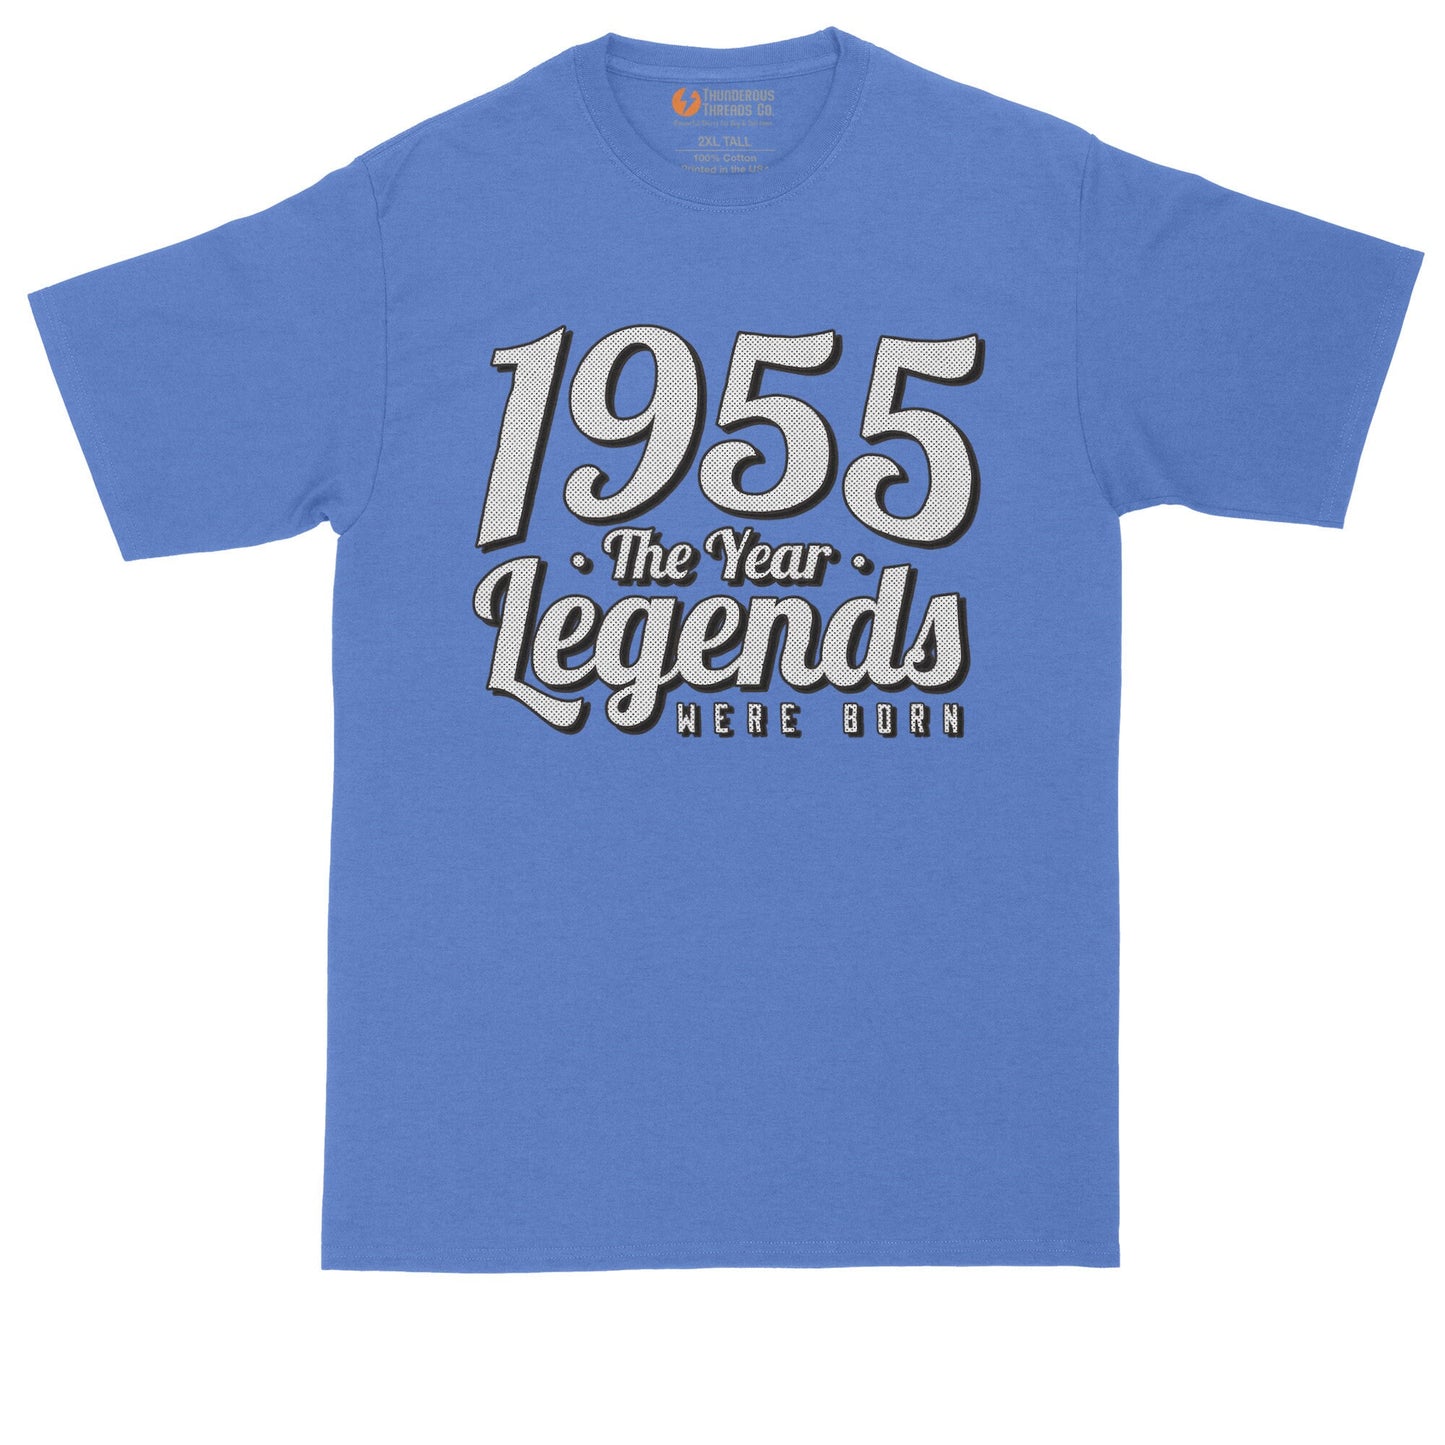 1955 The Year Legends Were Made | Personalize with Your Own Year | Birthday Shirt | Mens Big & Tall T-Shirt